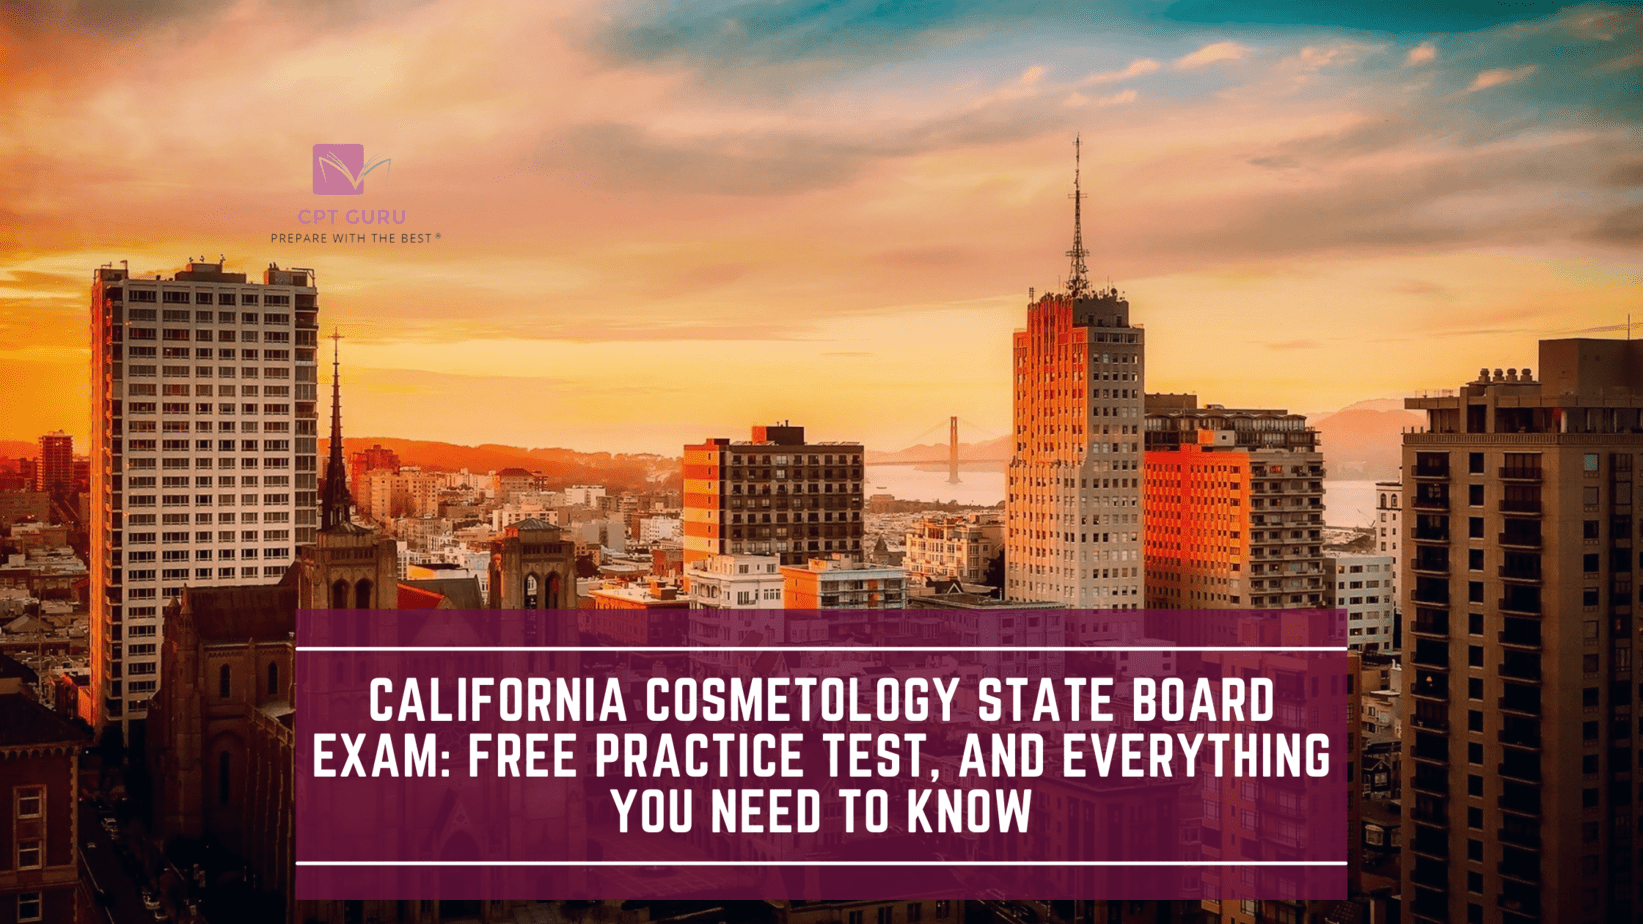 California Cosmetology State Board Exam: Free Practice Test, and Everything You Need to Know